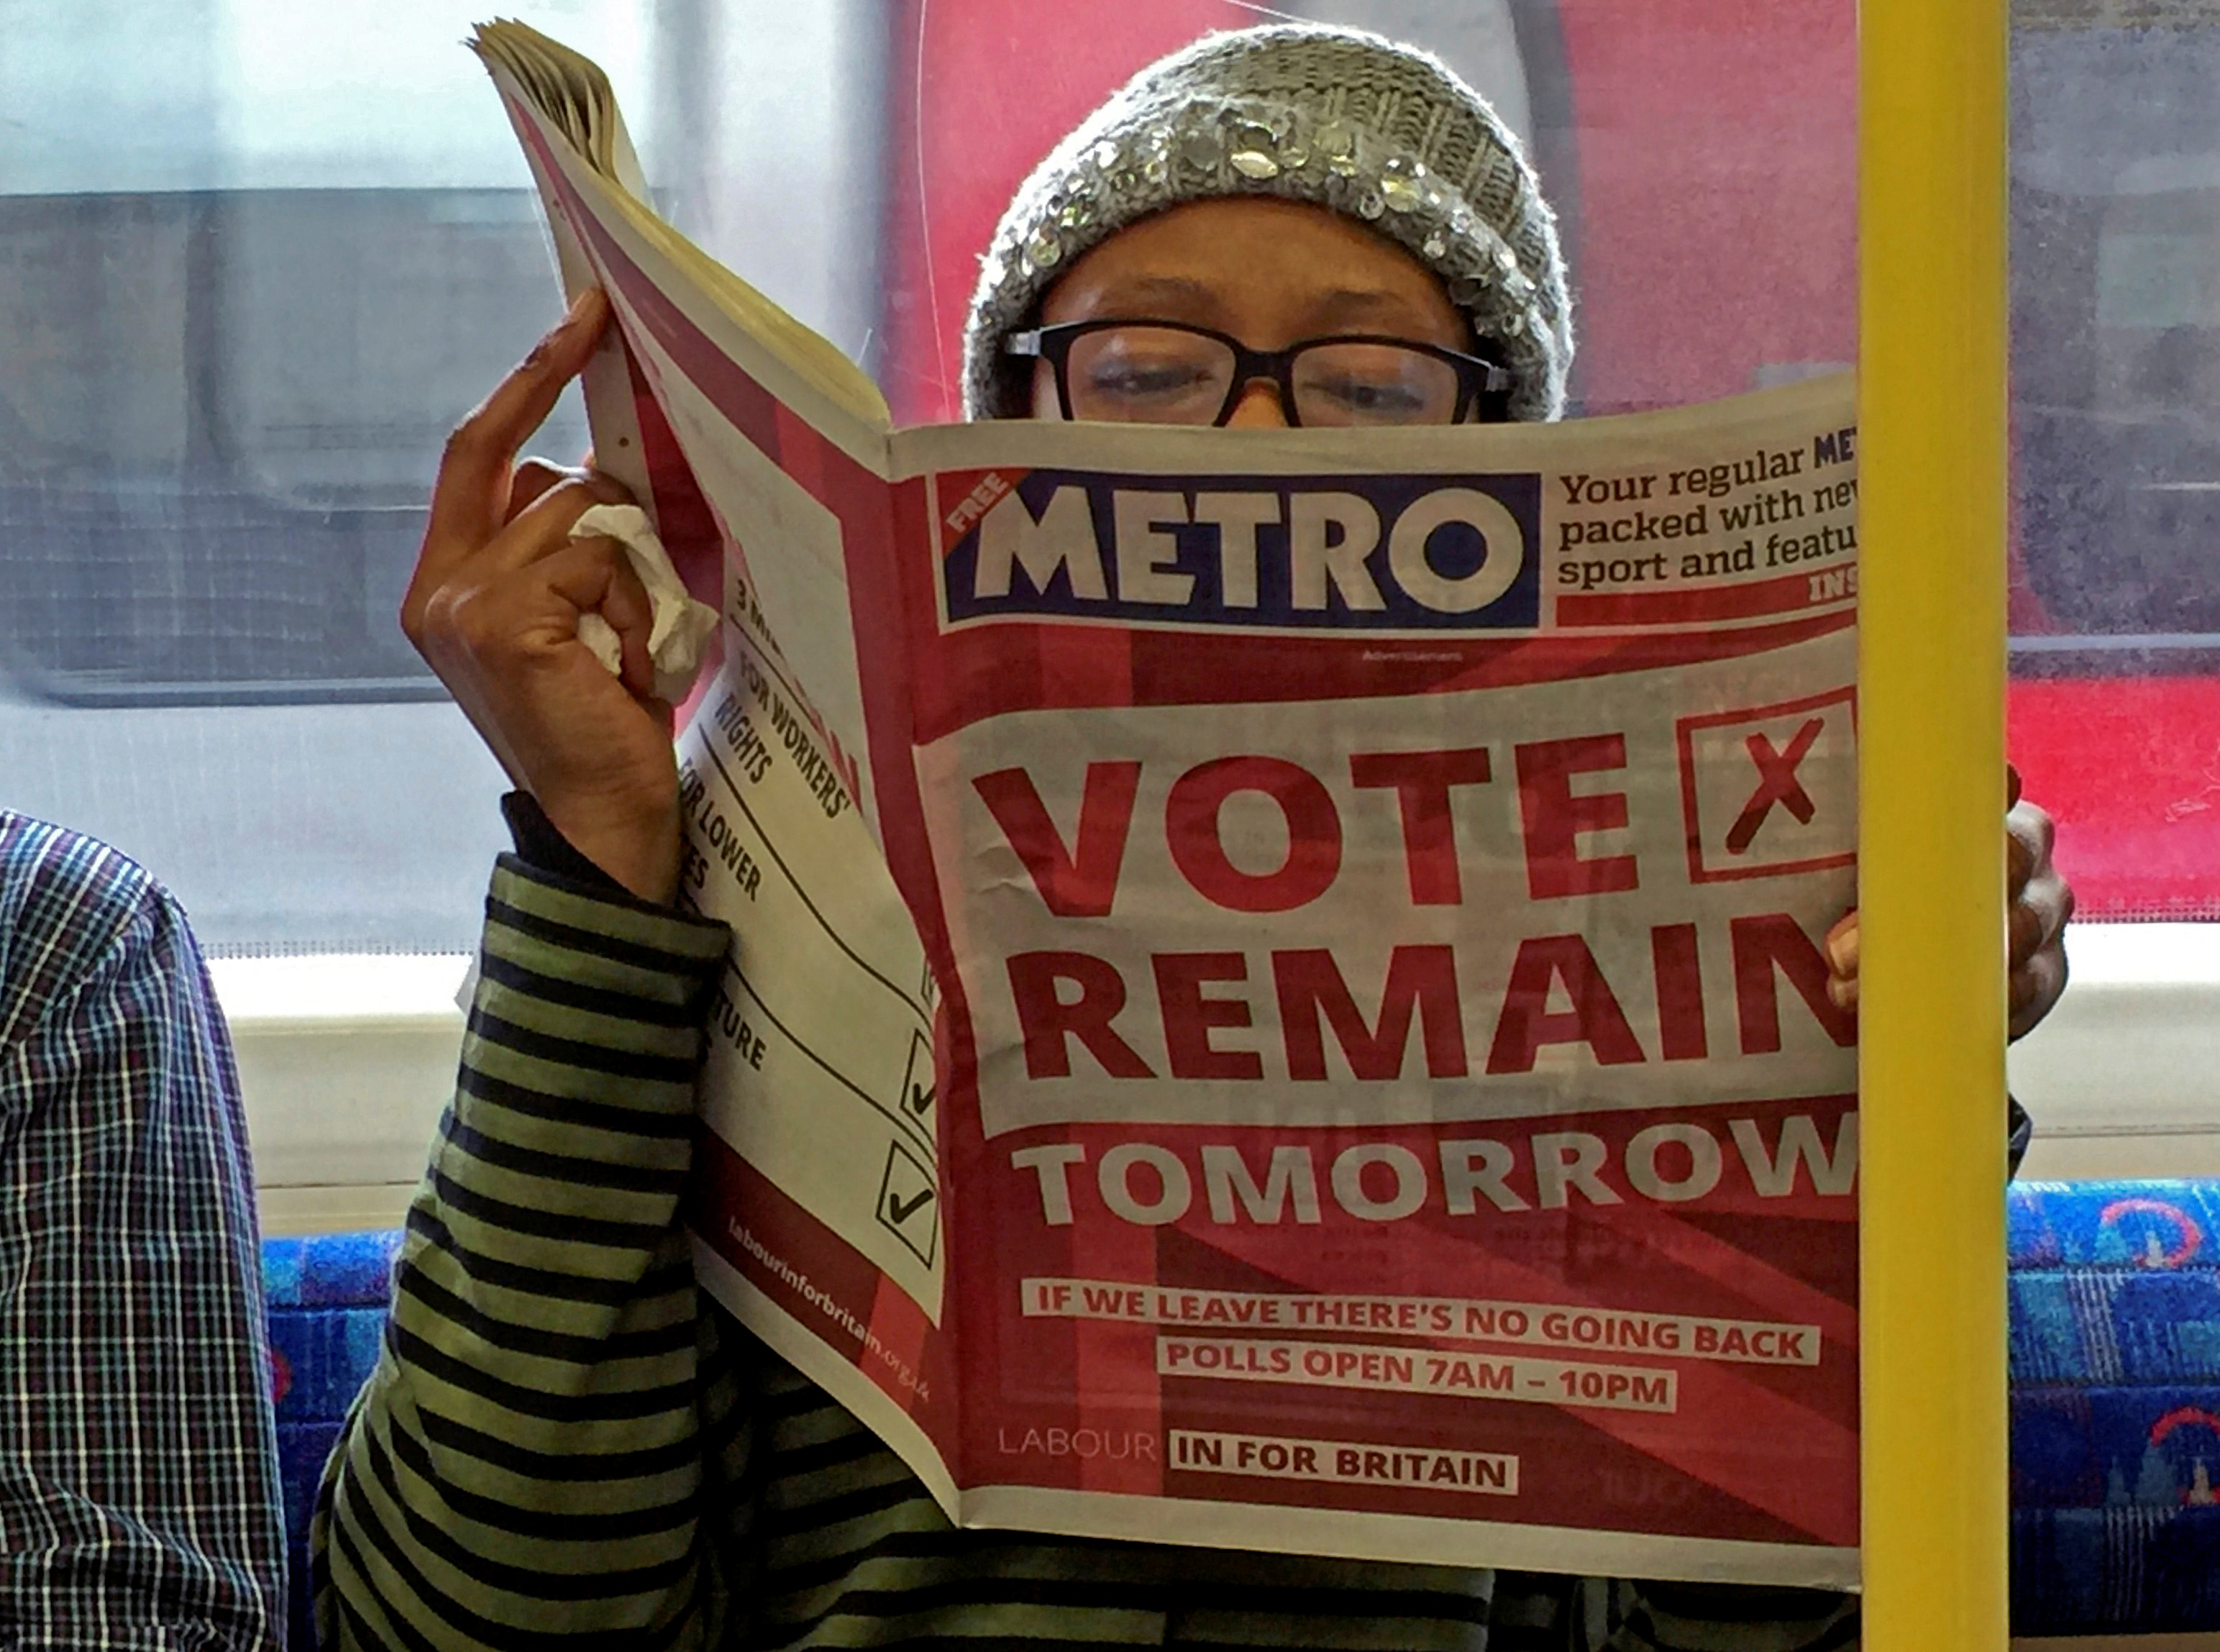 A woman reads a newspaper in London during the EU referendum campaign